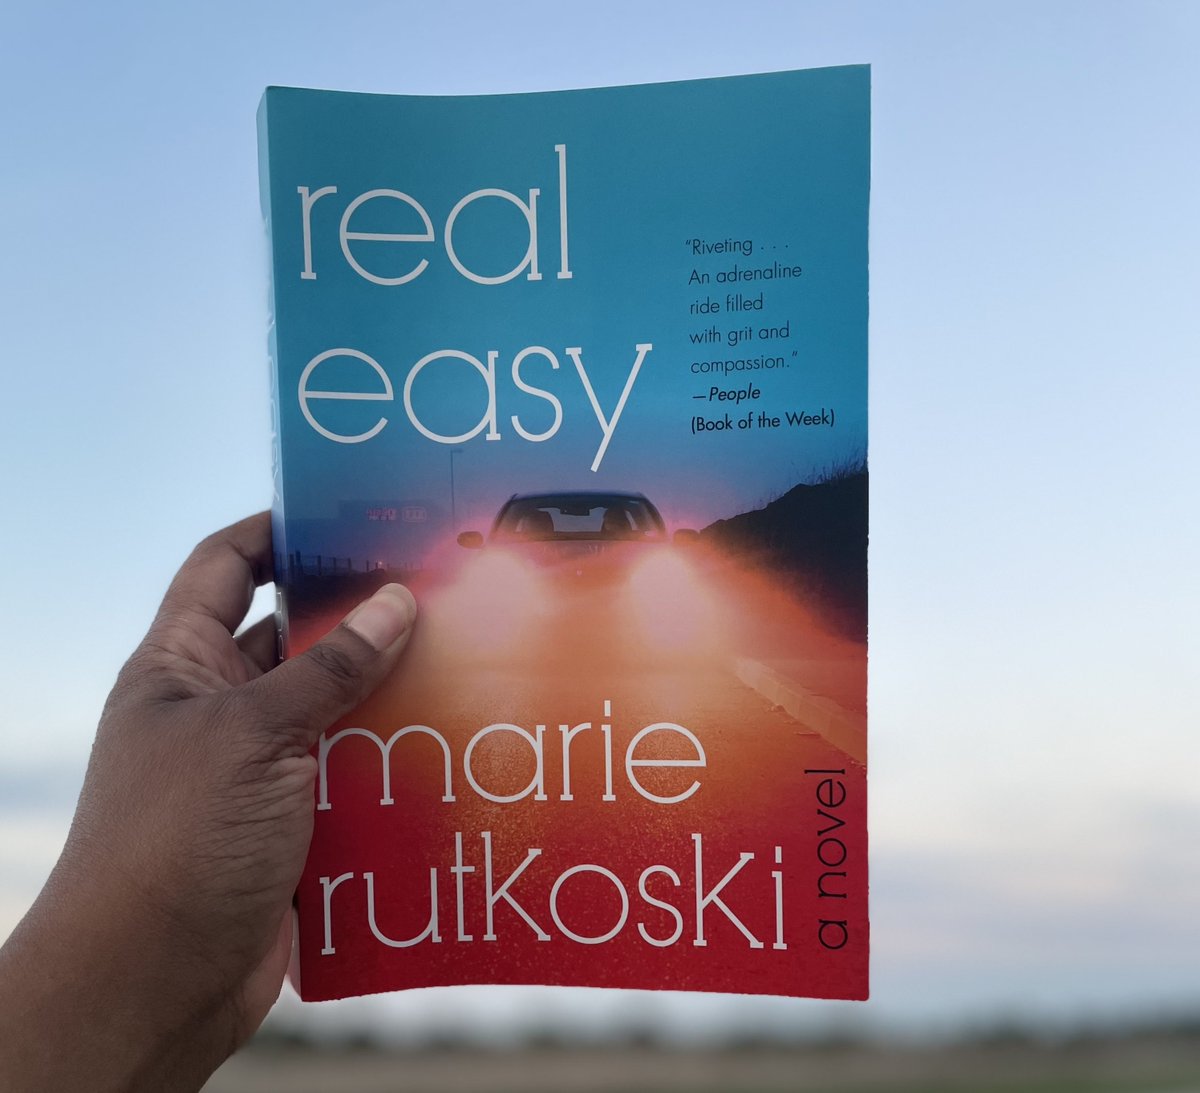 ✨ Happy paperback pub day to an influencer favorite, REAL EASY by @marierutkoski! This compulsive, unexpectedly hopeful thriller has: 👭 friendship 🔪 a killer 🕵️ a missing person 💃 club culture Grab this 'adrenaline-filled ride' now: ow.ly/qIub50NBrER